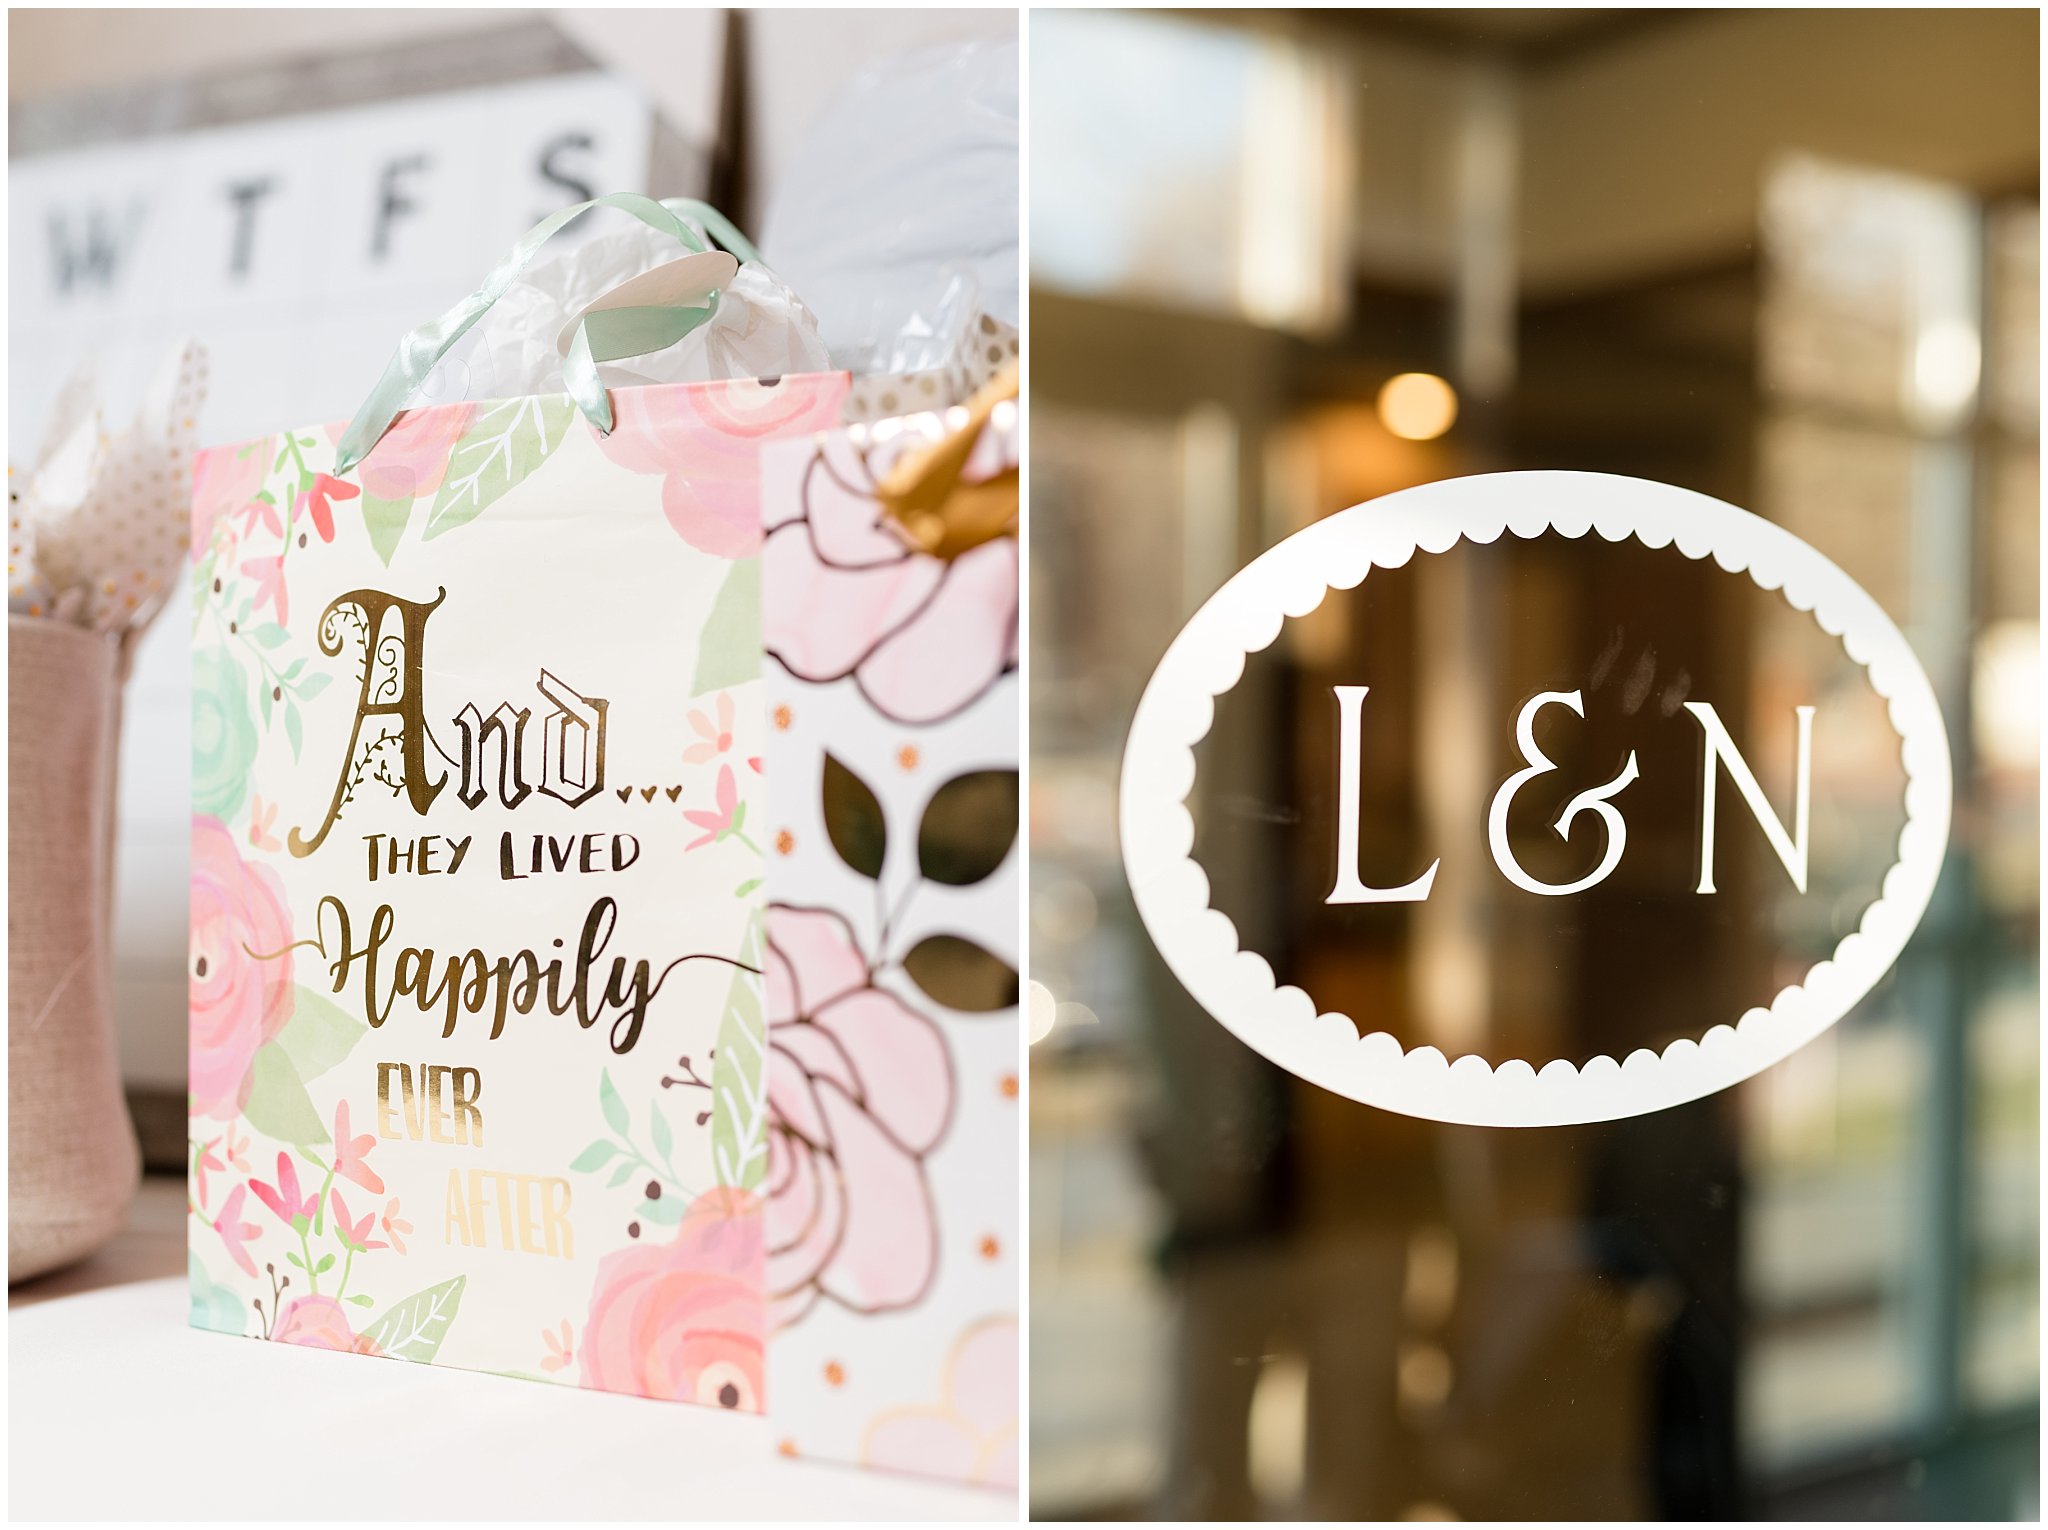 Window cling decals with bride and groom initials | Ogden Temple Wedding | Jessie and Dallin Photography